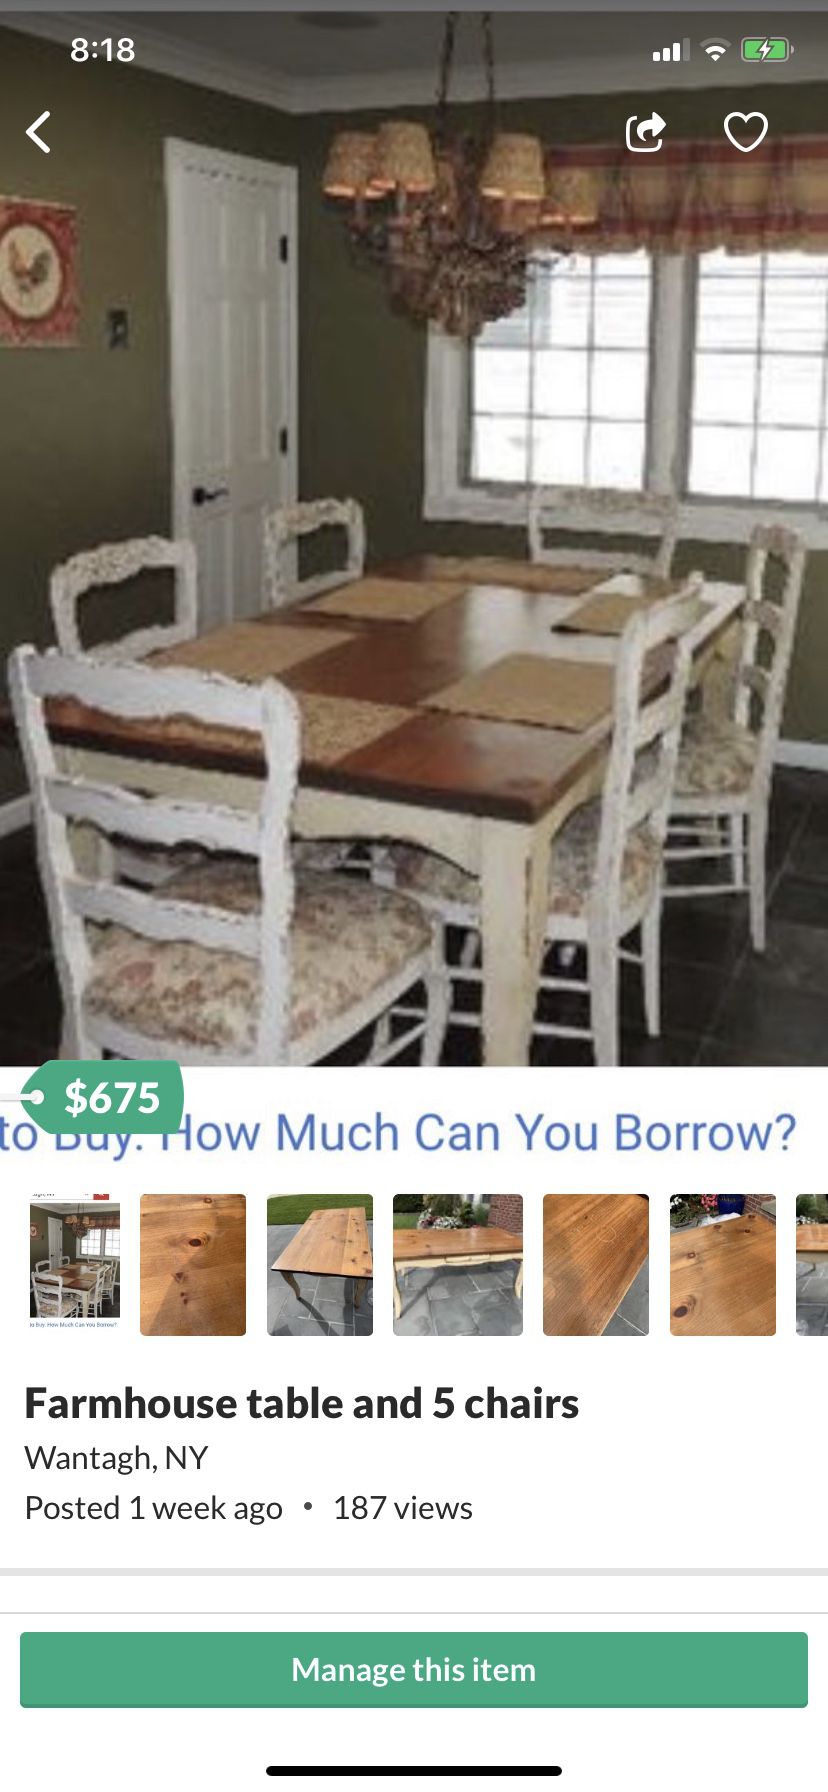 Farmhouse kitchen table and chairs